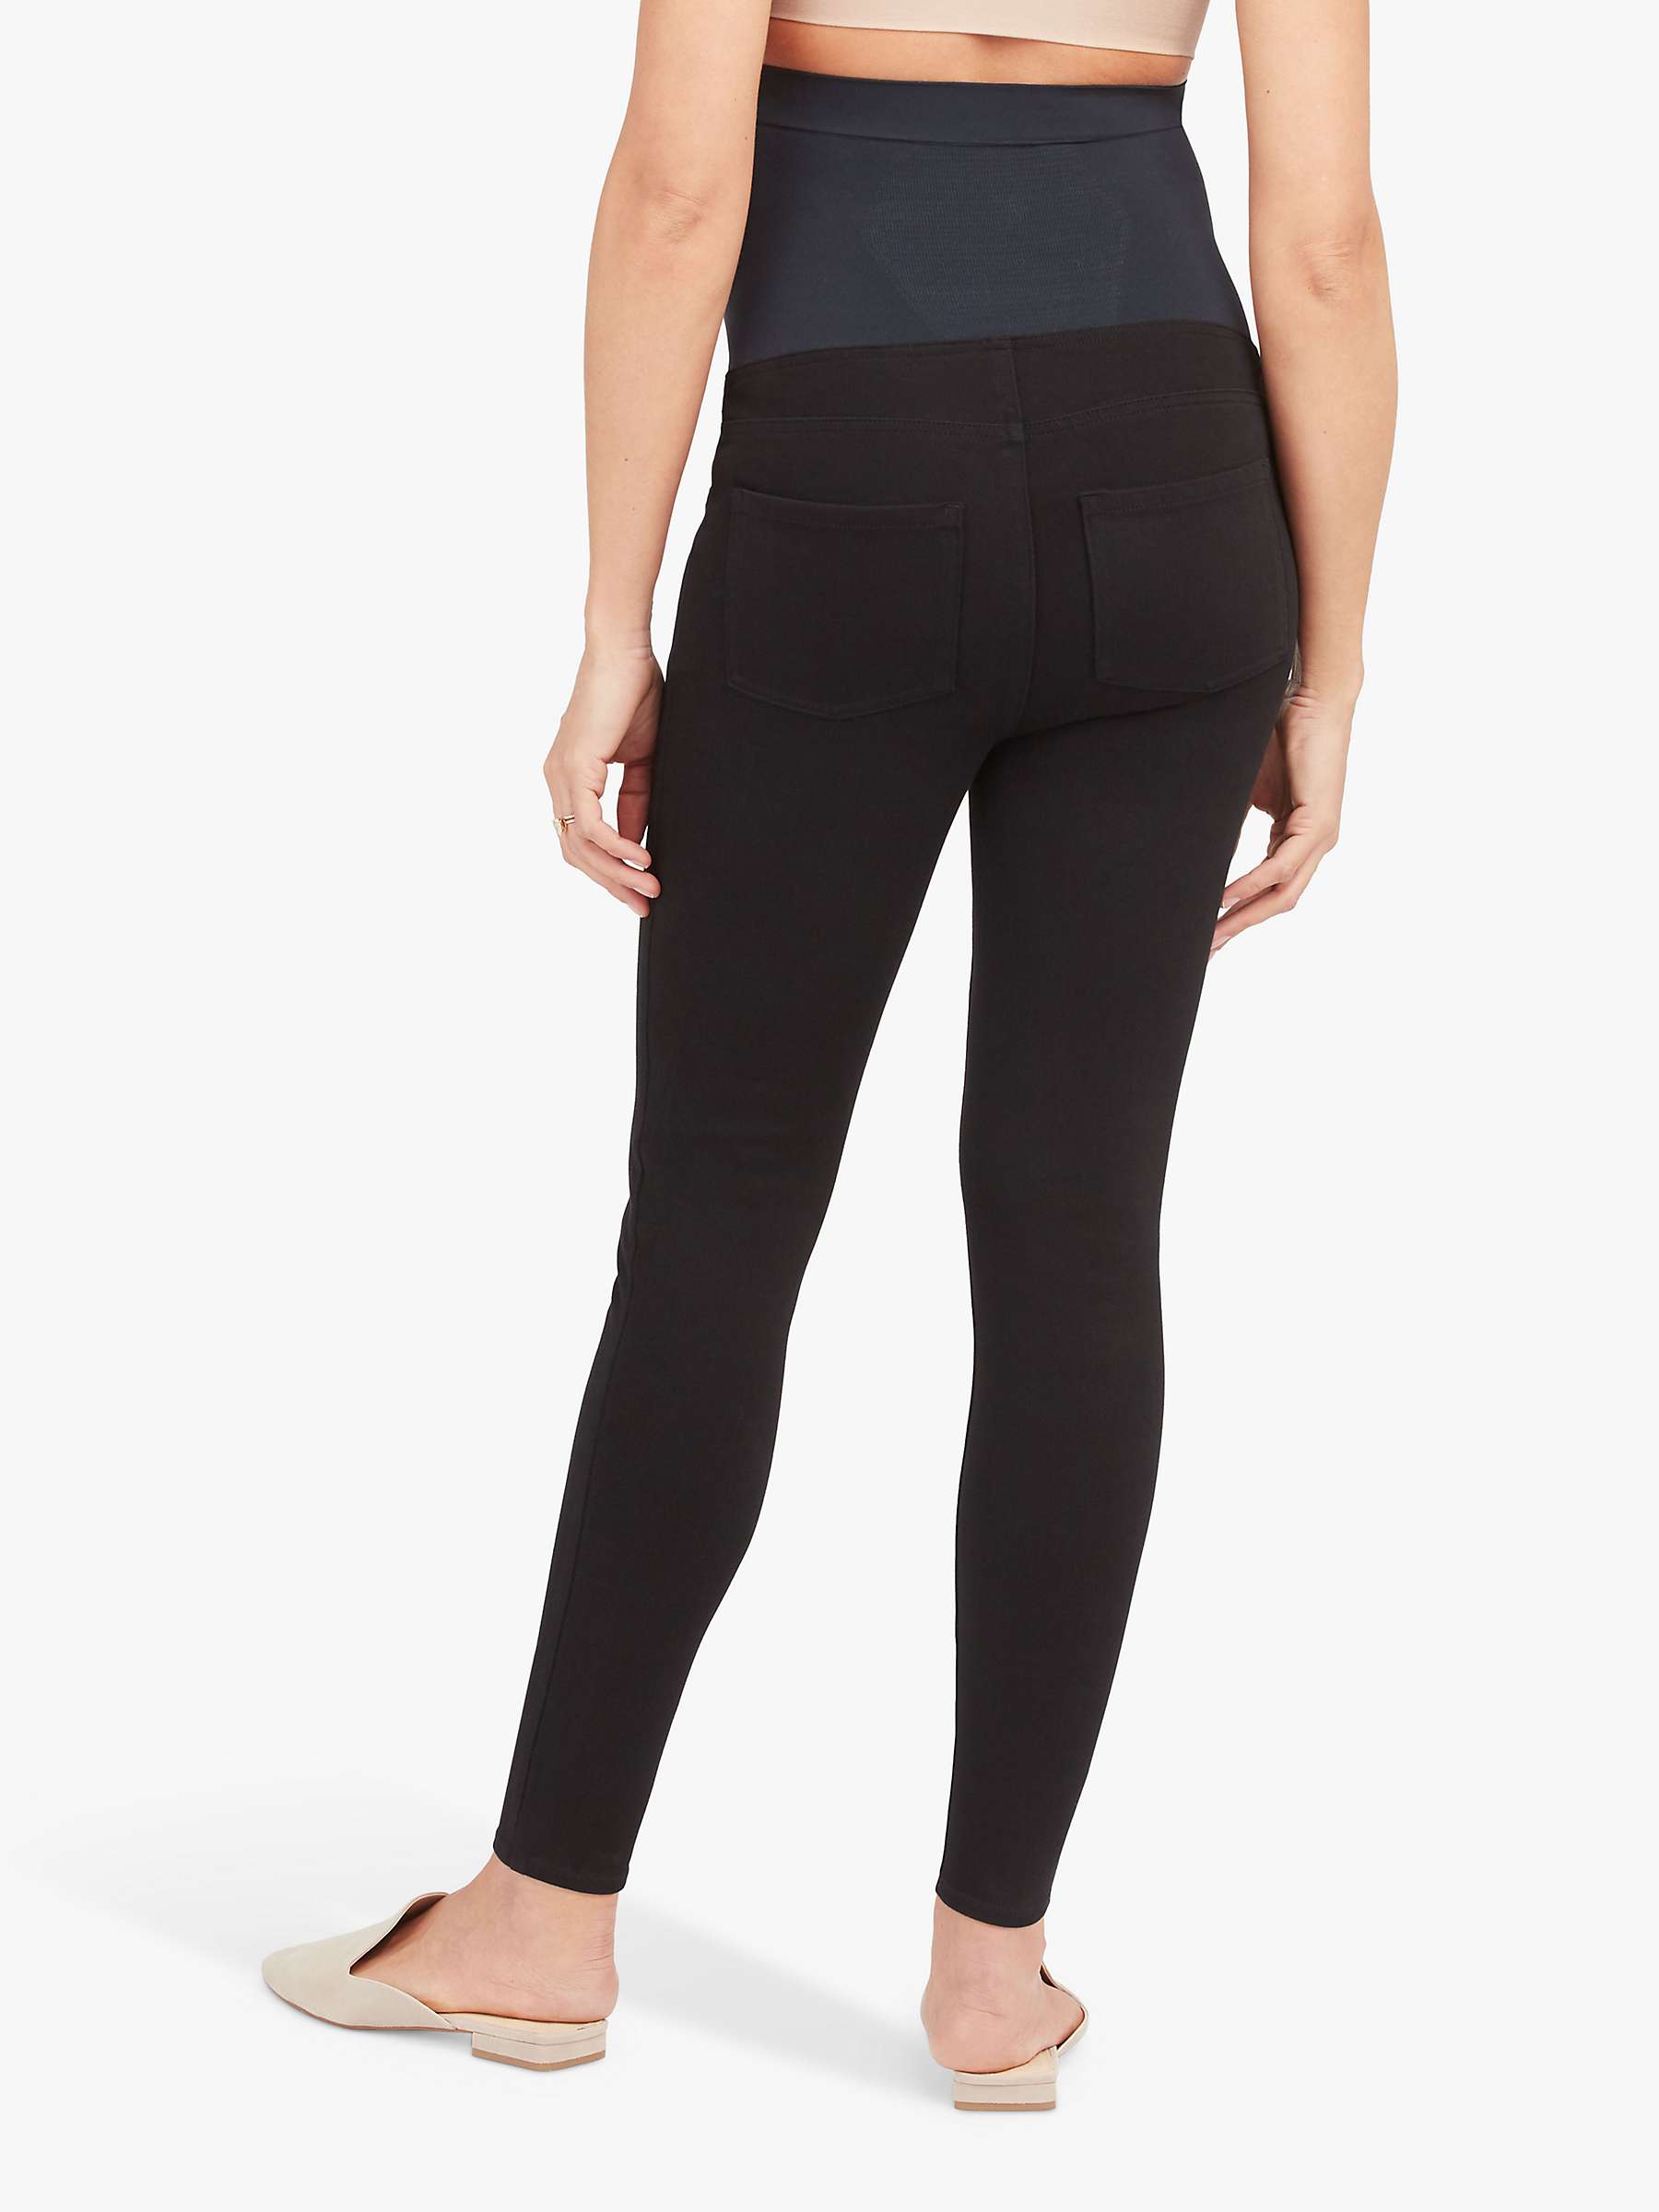 Buy Spanx Mama Maternity Jeans, Black Online at johnlewis.com